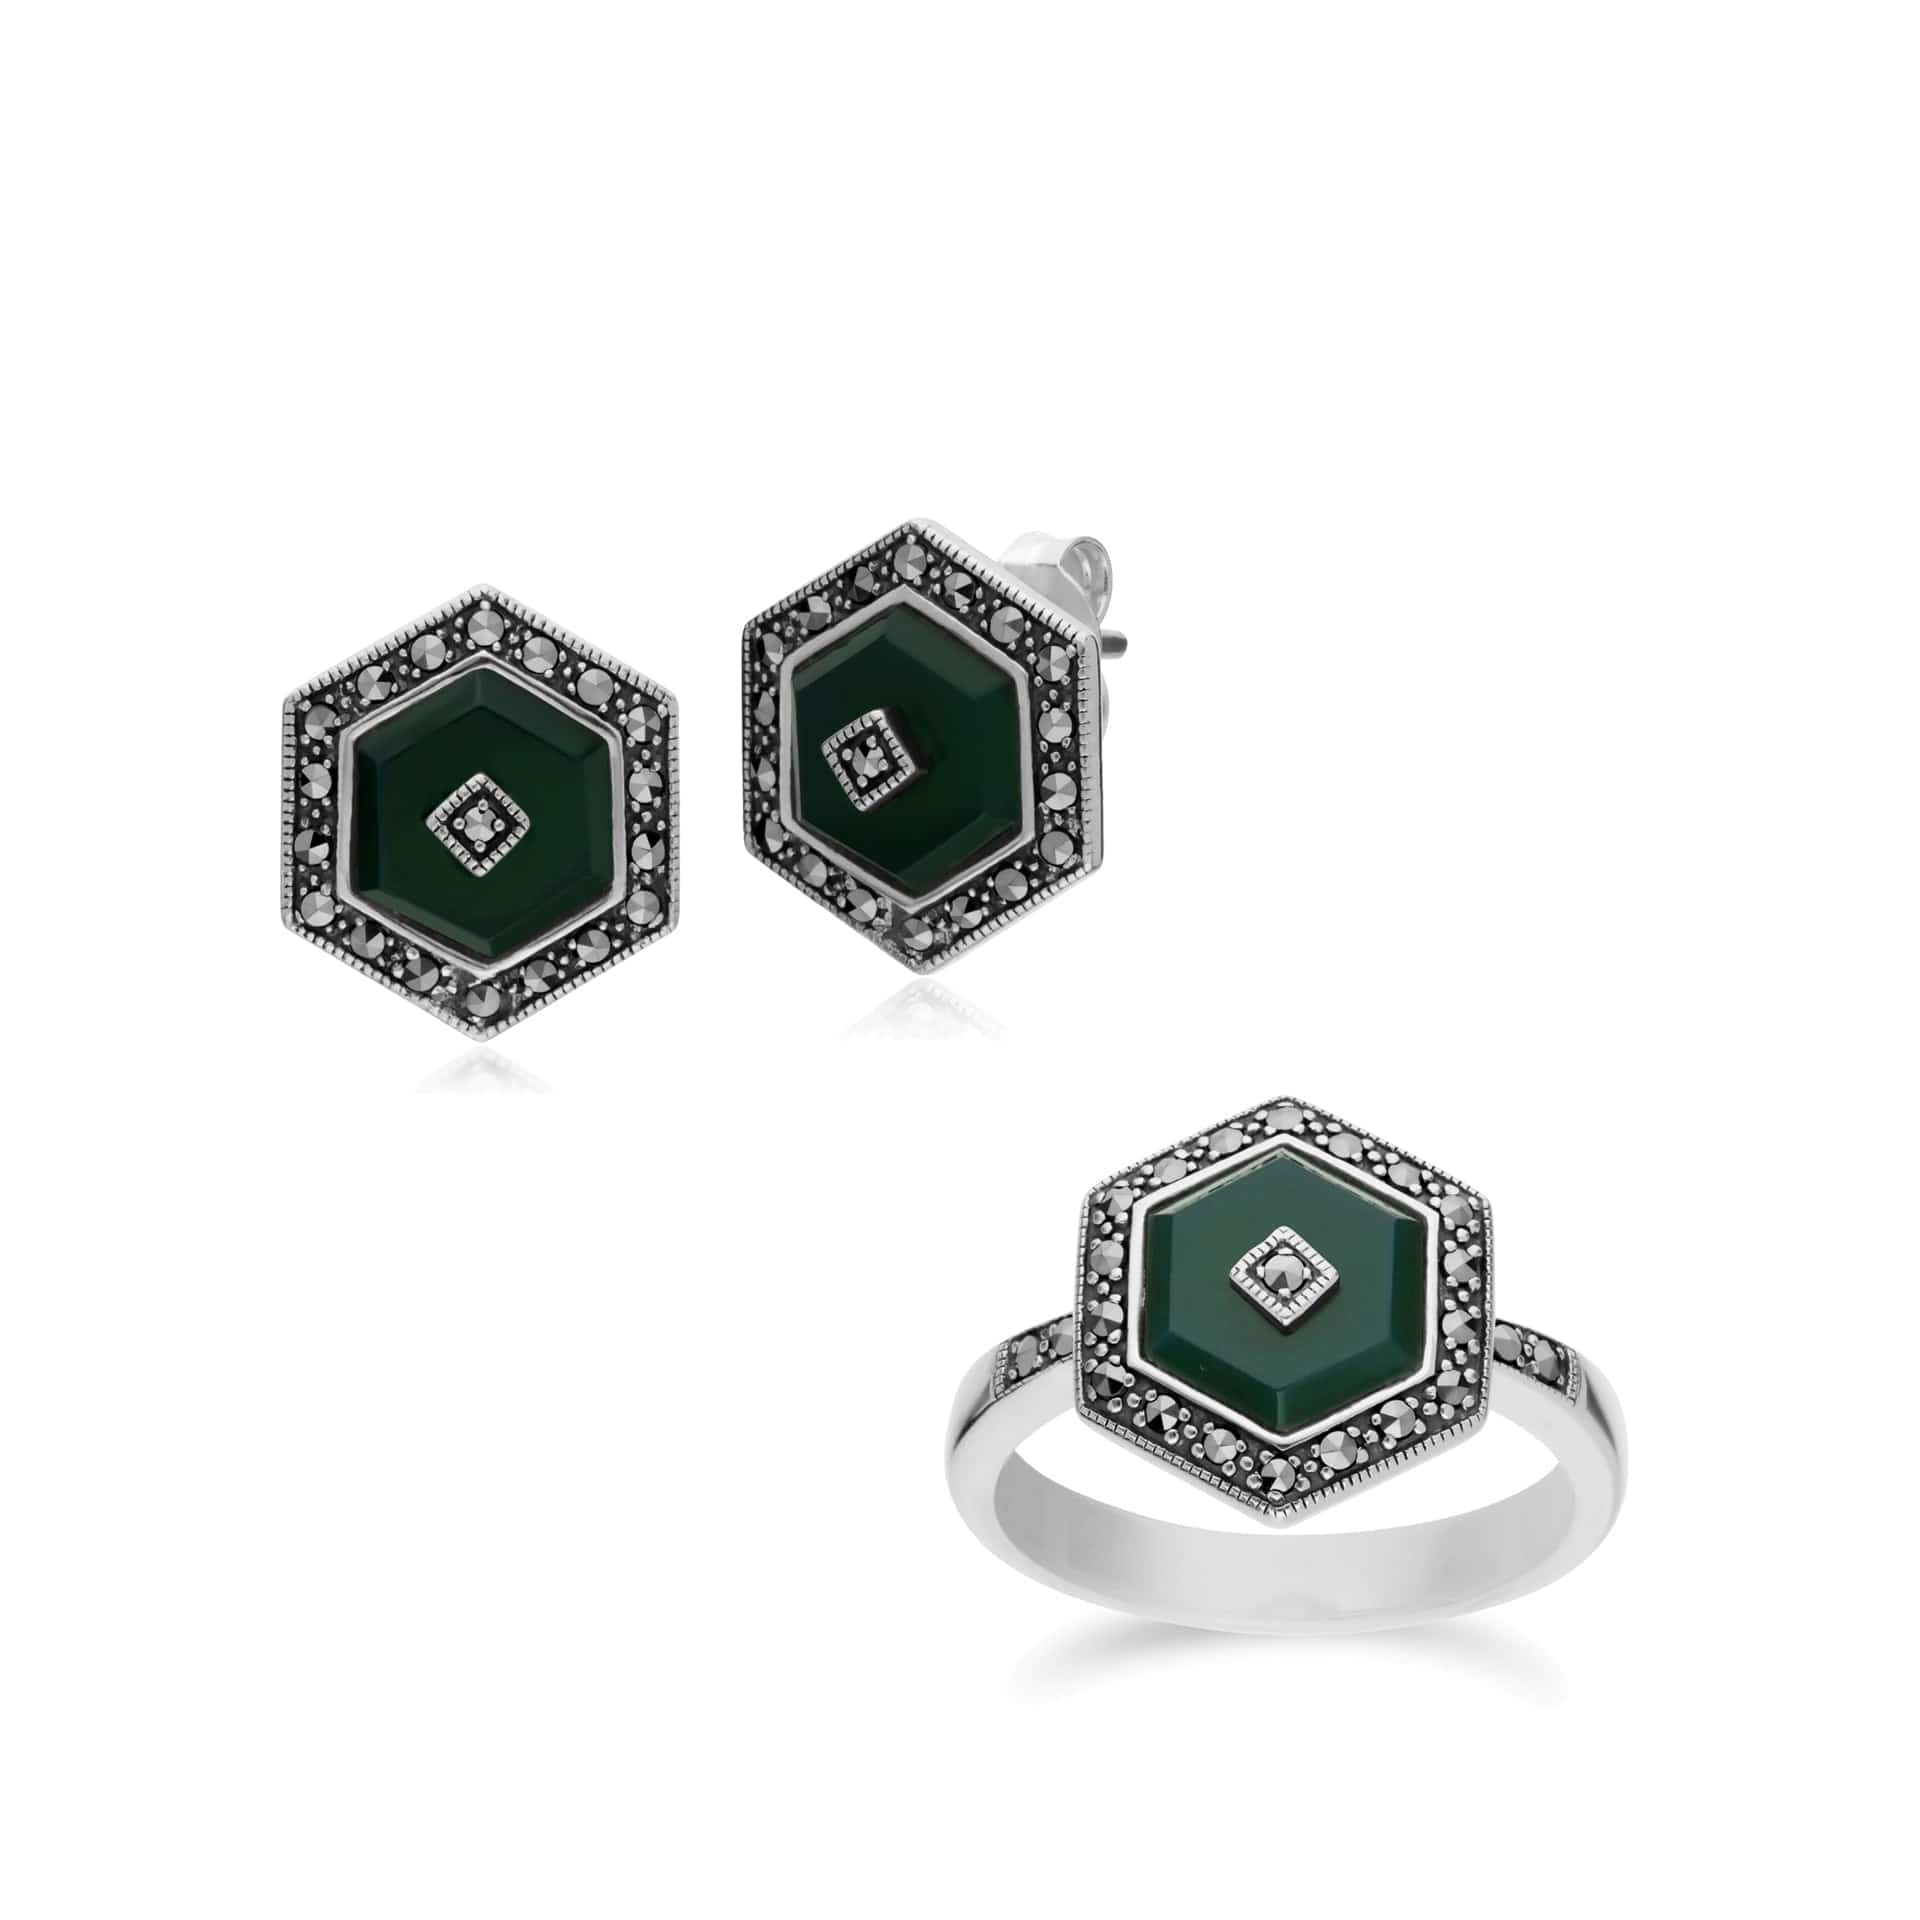 214E872901925-214R605801925 Art Deco Style Dyed Chalcedony and Marcasite Hexagon Stud Earrings & Ring Set in 925 Sterling Silver 1